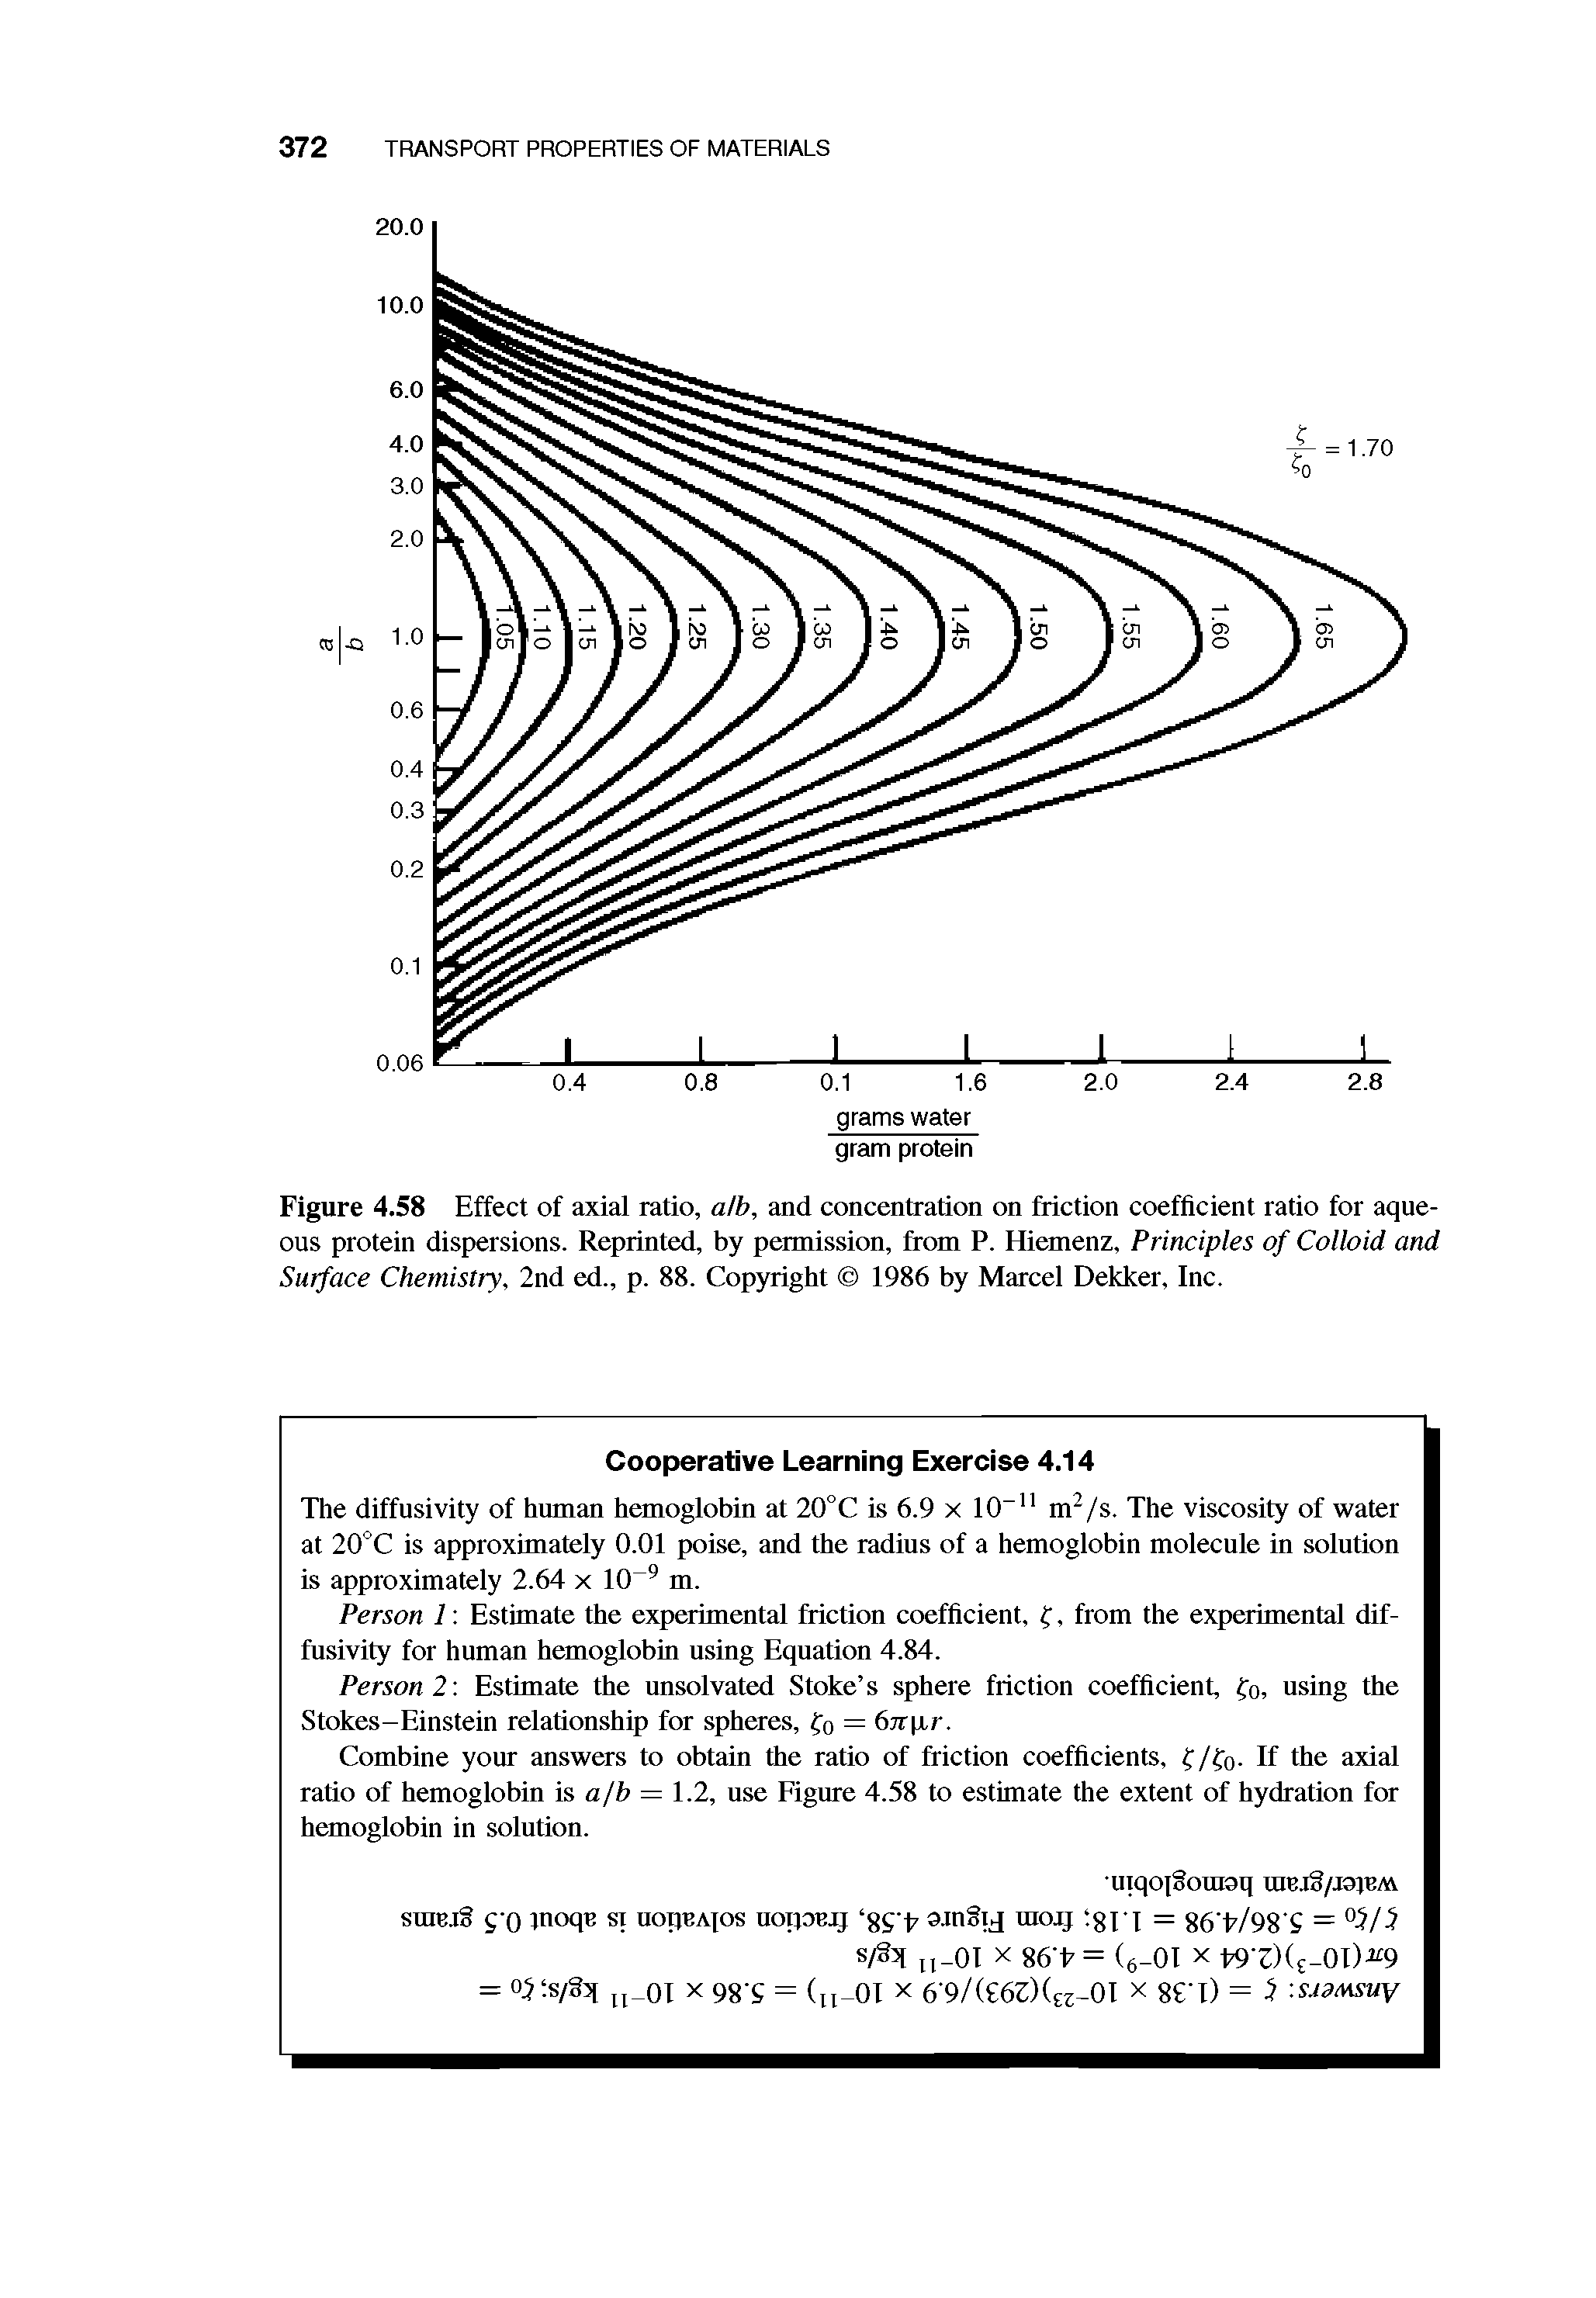 Figure 4.58 Effect of axial ratio, alb, and concentration on friction coefficient ratio for aqueous protein dispersions. Reprinted, by permission, from P. Hiemenz, Principles of Colloid and Surface Chemistry, 2nd ed., p. 88. Copyright 1986 by Marcel Dekker, Inc.